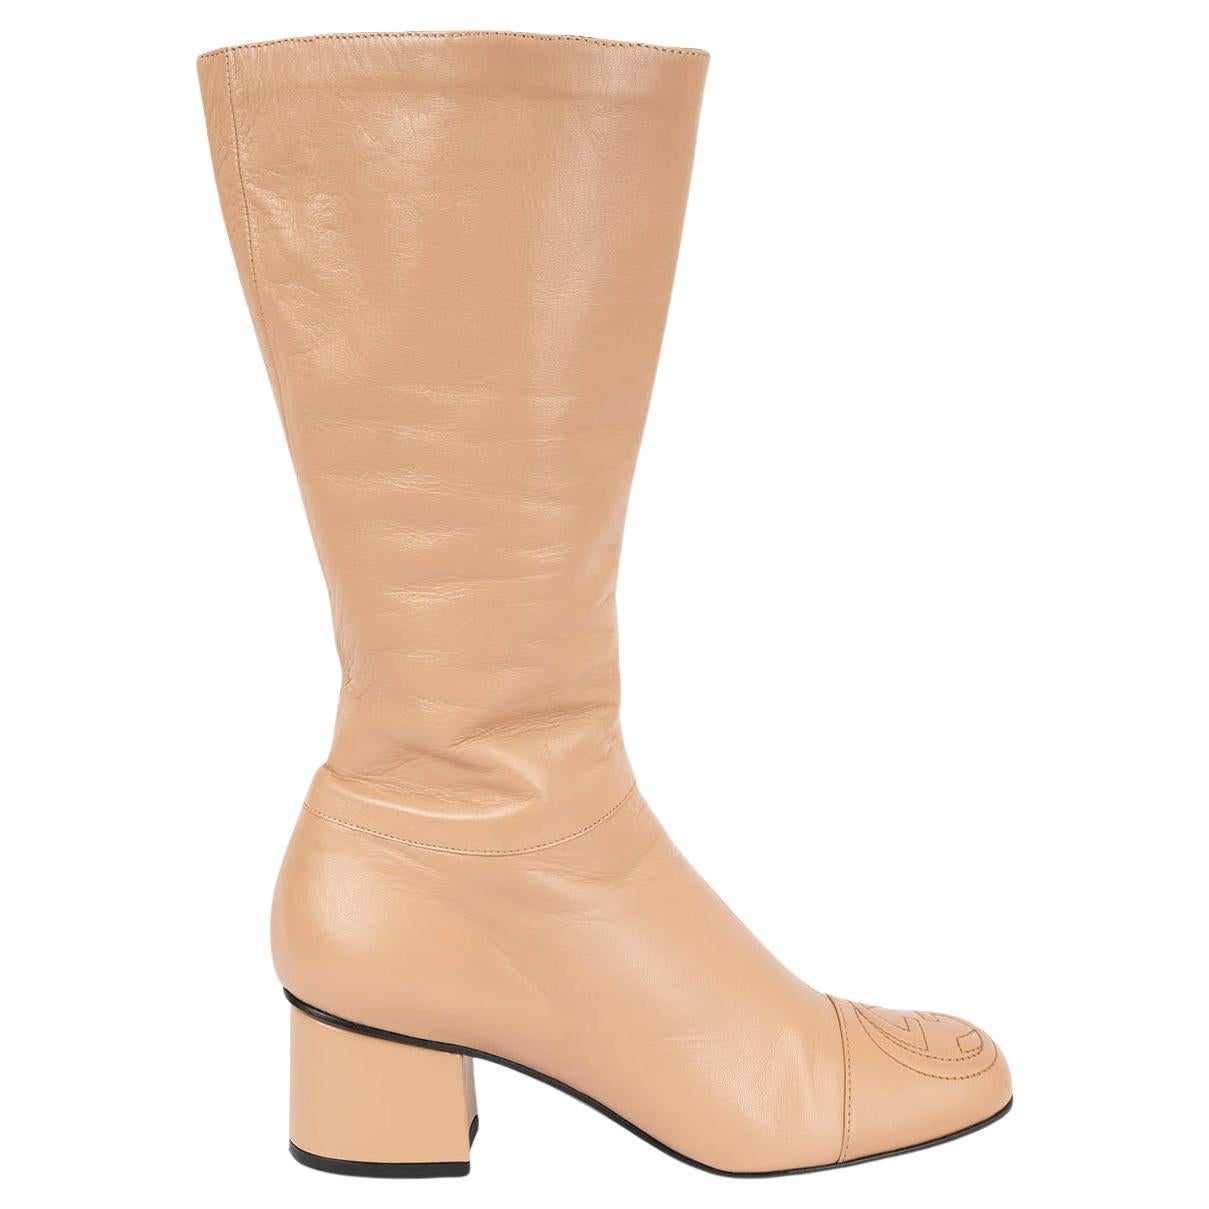 Gucci Tan Beige Leather Soho GG Block Heel Mid Calf Boots Shoes 37